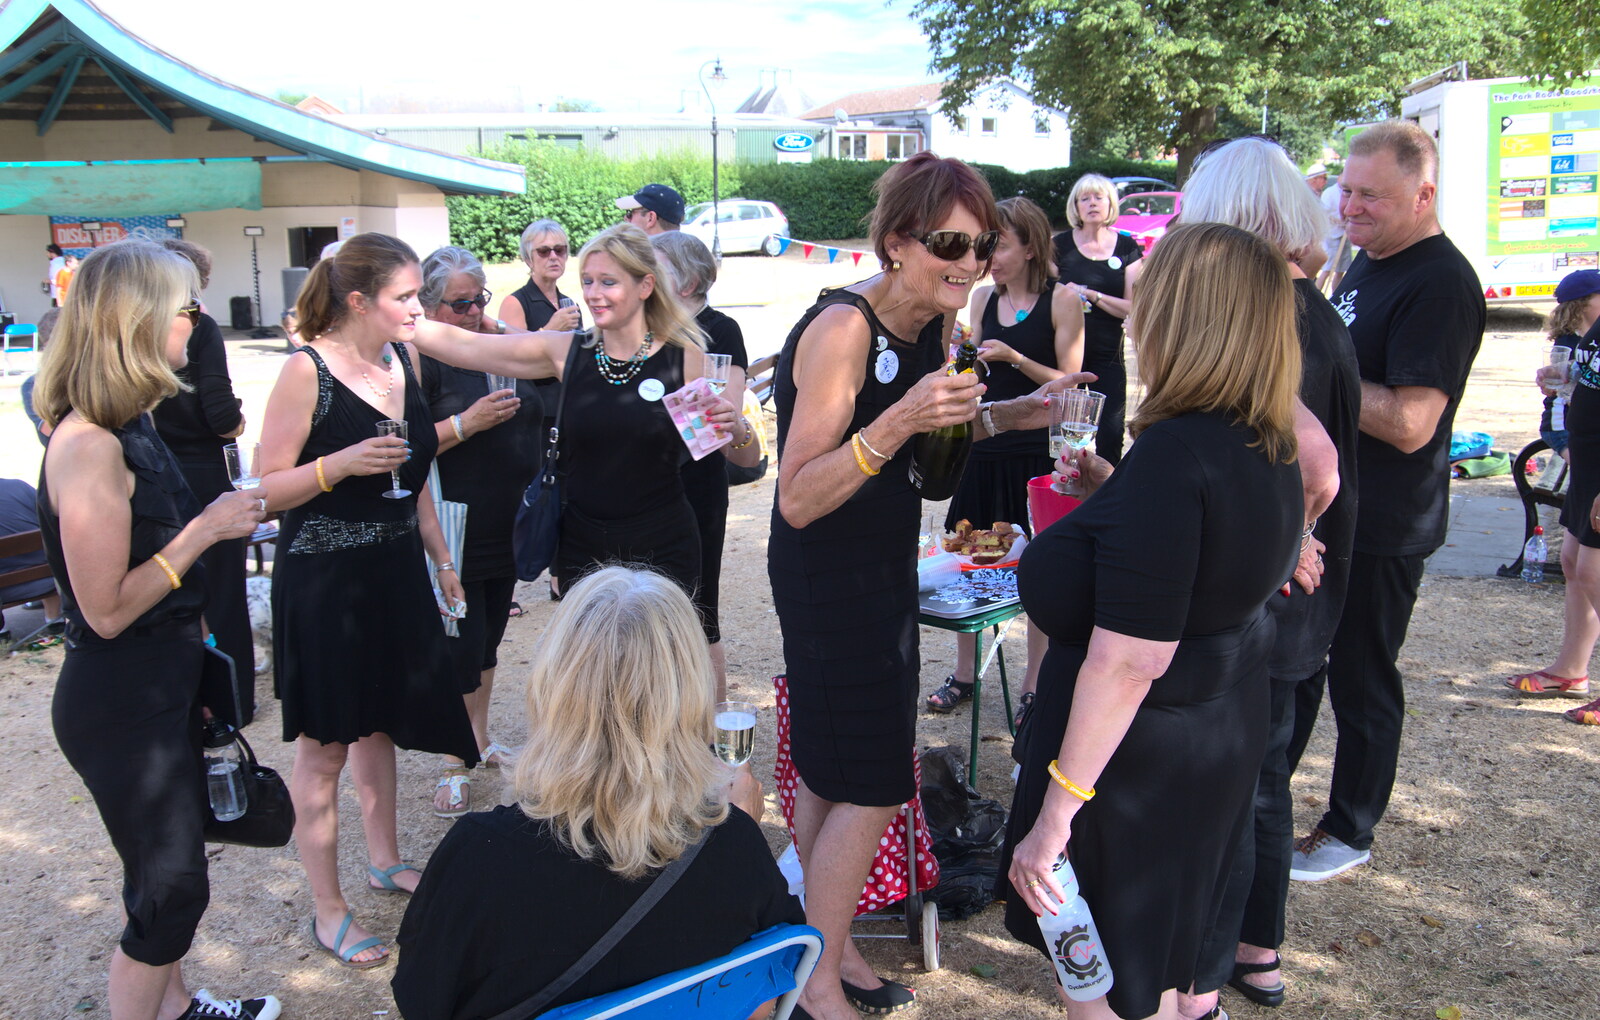 Some prosecco is handed out from Diss Fest, The Park, Diss, Norfolk - 22nd July 2018